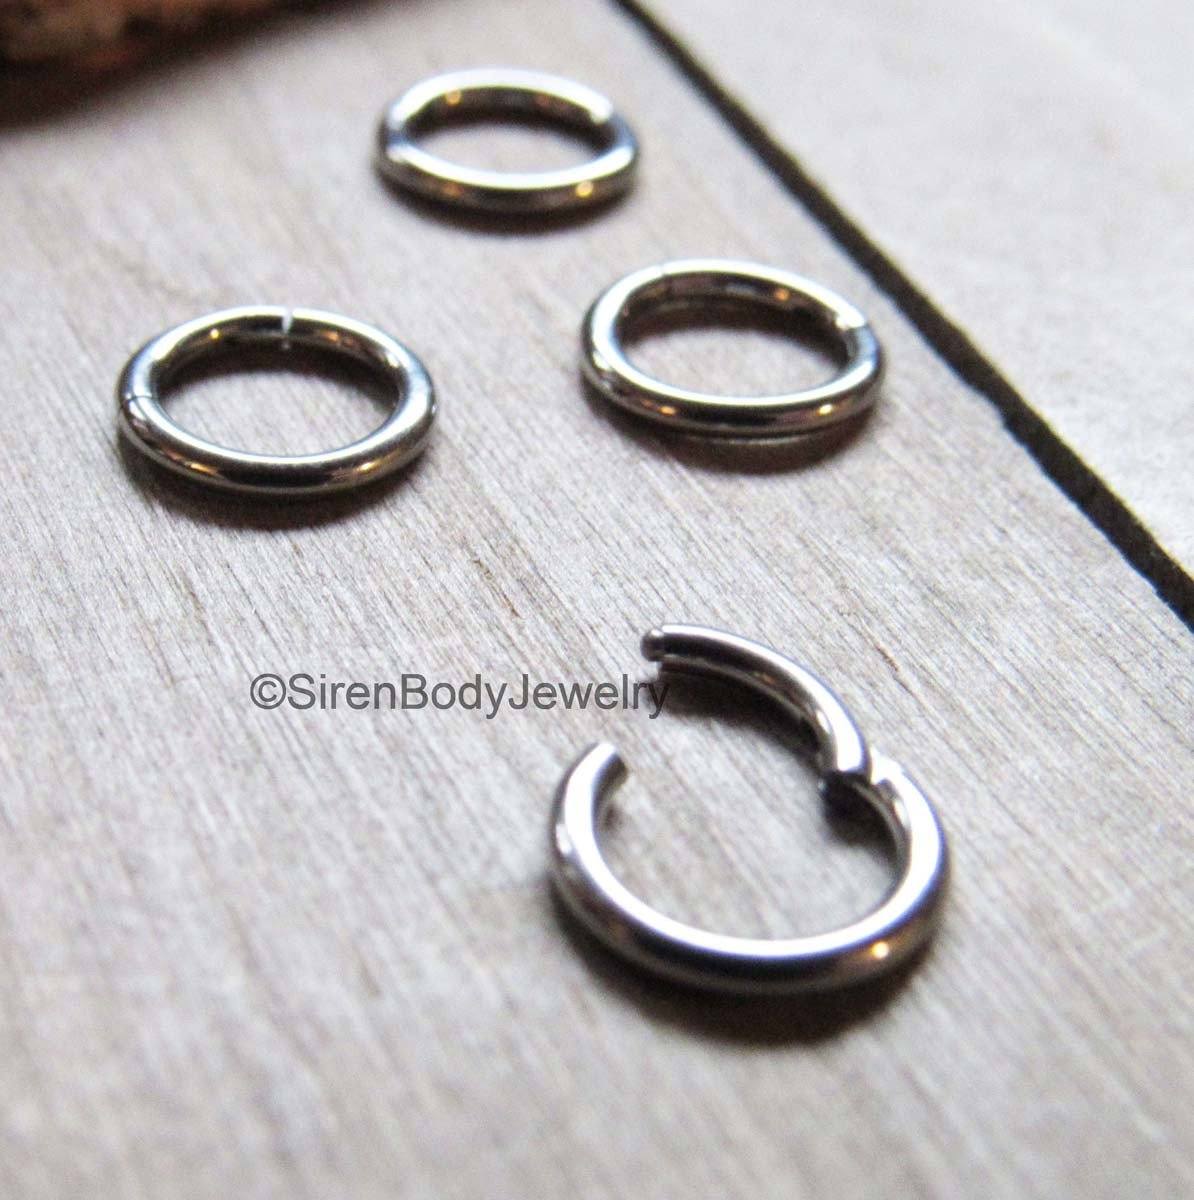 Indian Septum Ring, Gold Septum Piercing, Tribal Septum Ring, 16g Septum  Nose Ring, 16g Septum Piercing, Nose Jewelry, Nose Piercing - Etsy